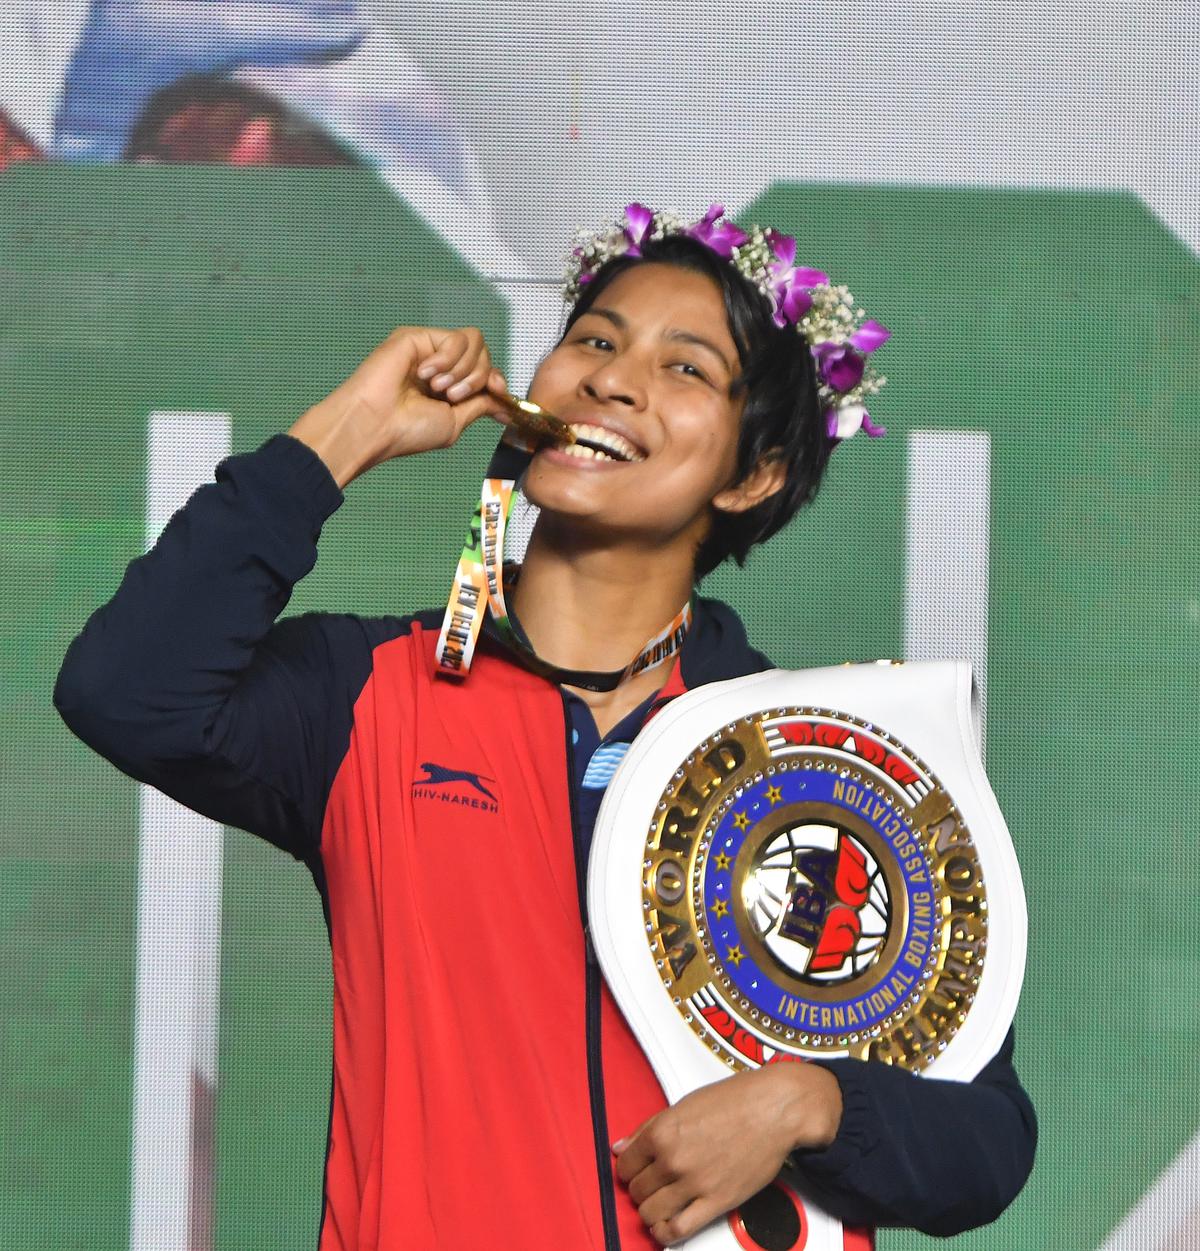 Lovlina Borgohain claimed the 75kg honours in the IBA Women’s Boxing World Championships in New Delhi on Wednesday, March 26.  